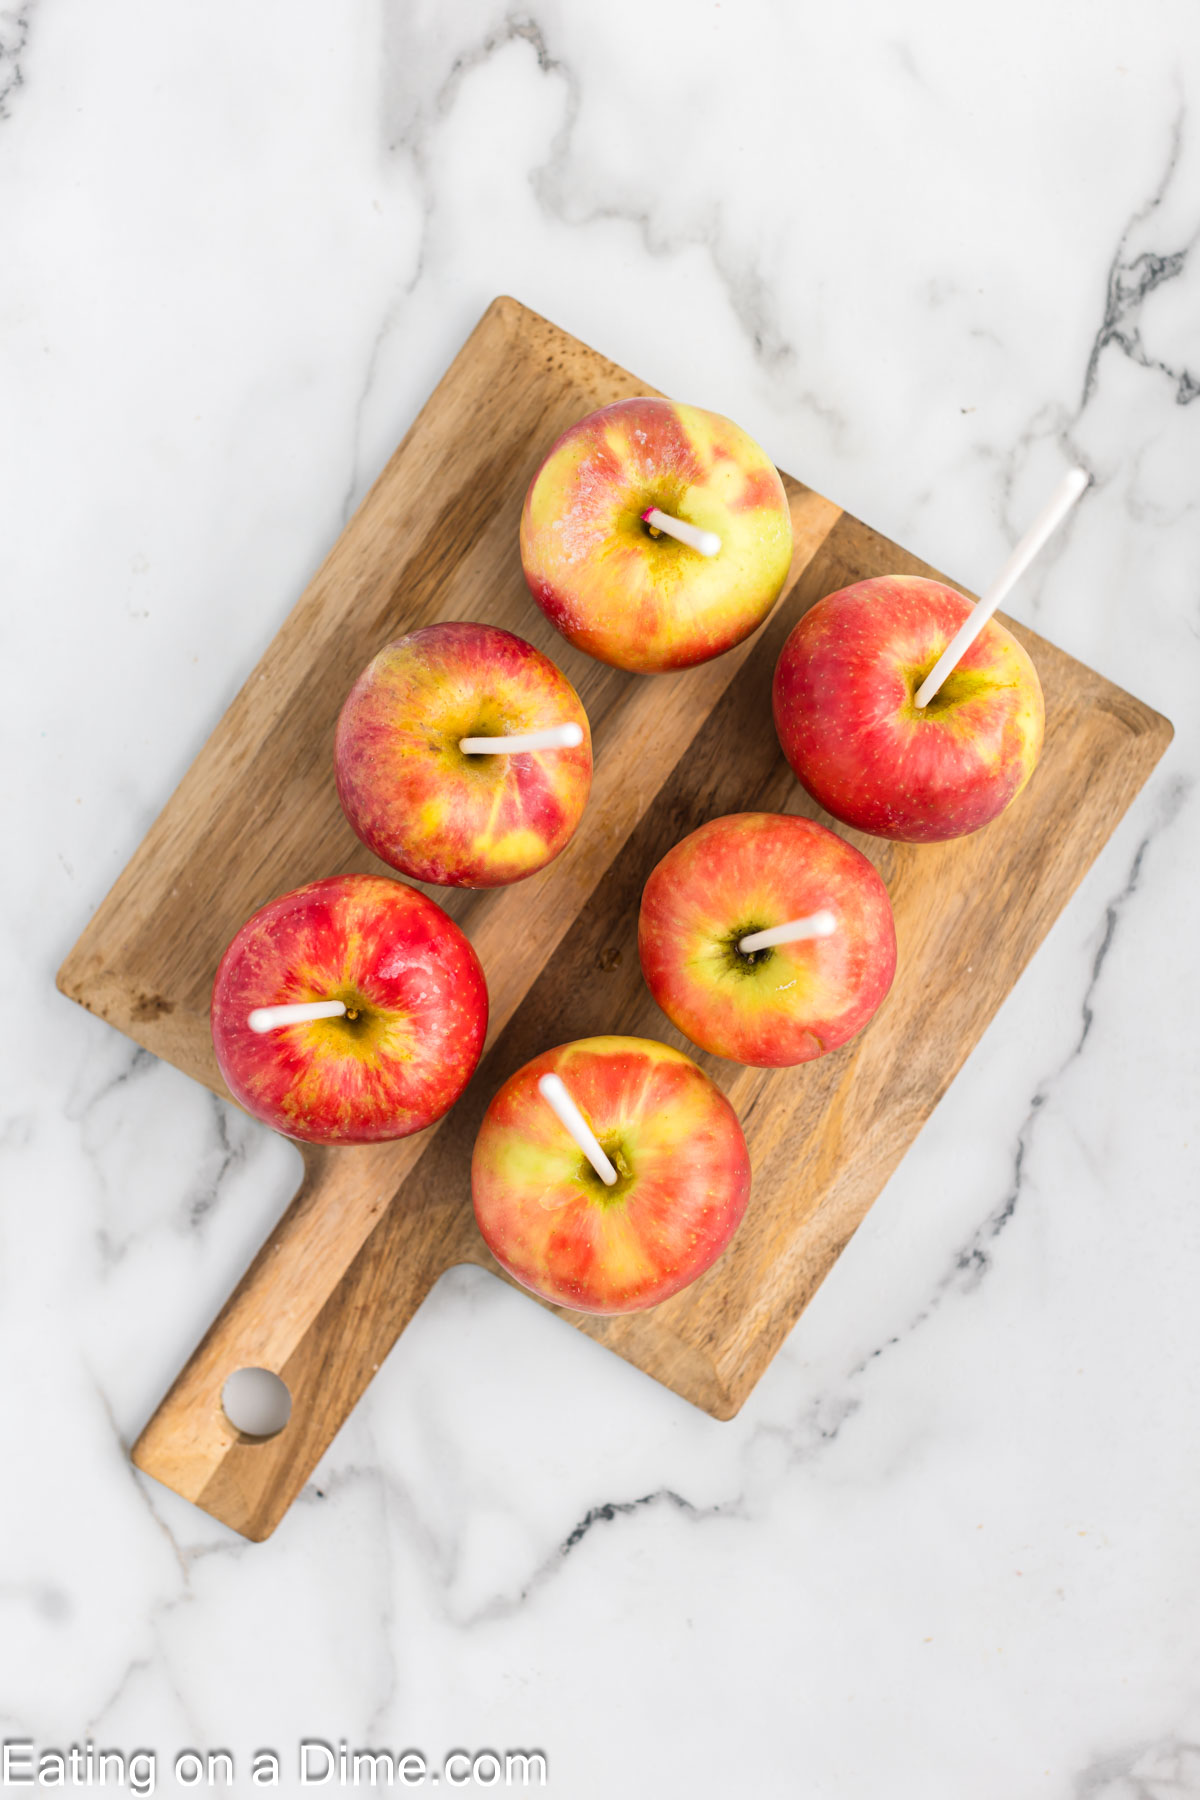 Inserting sticks into apples that are on a cutting board